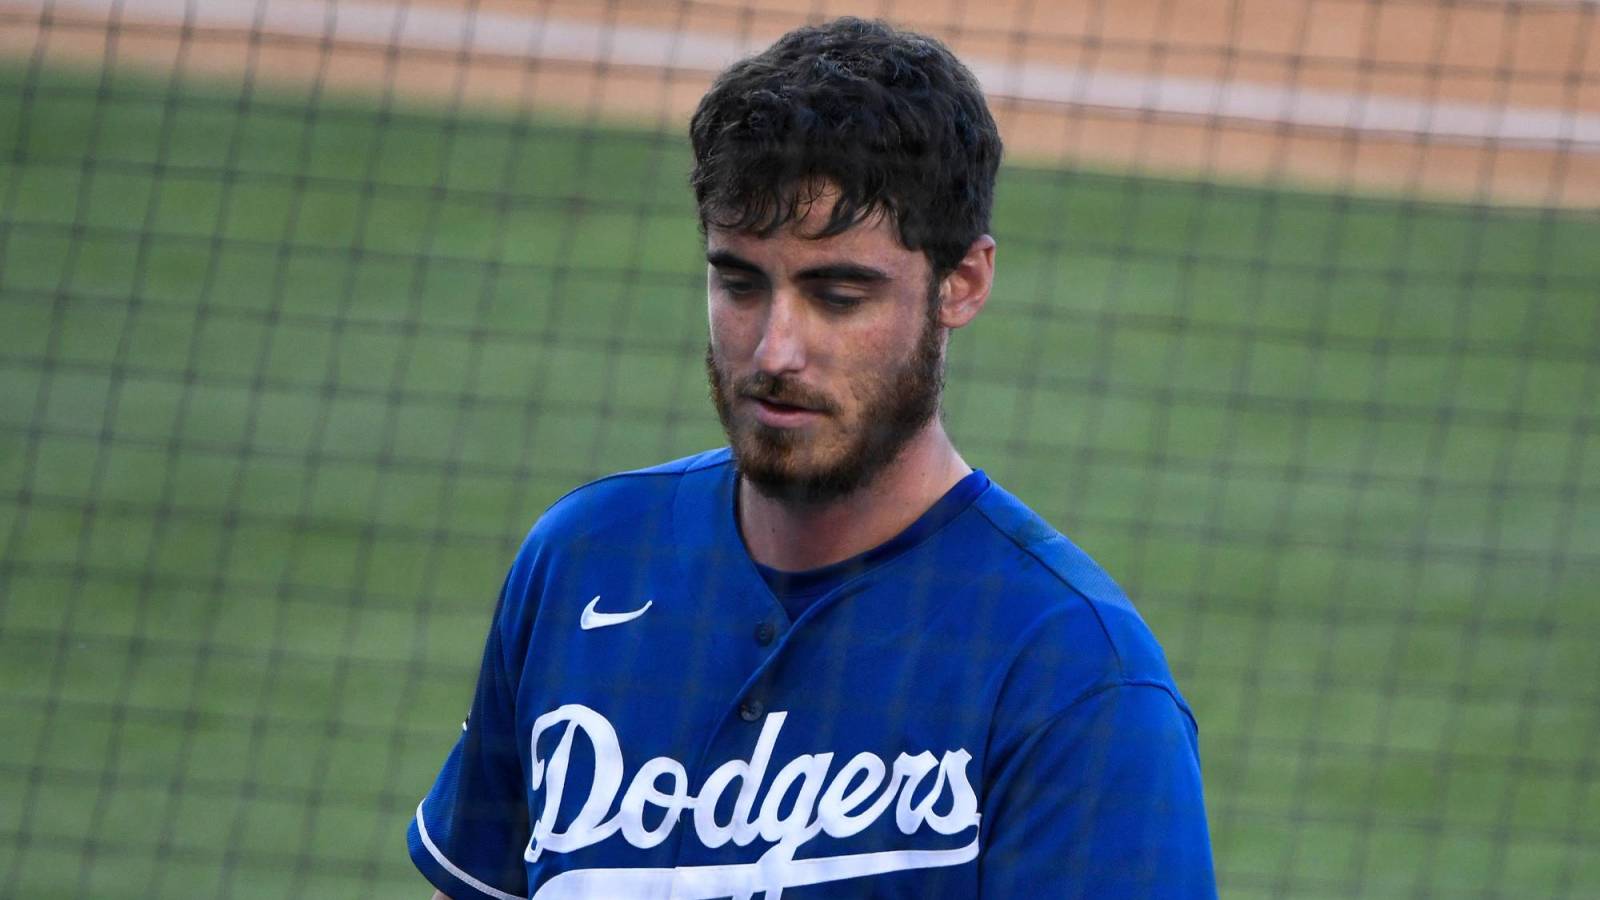 Dodgers' Cody Bellinger taking advantage of 'once in a lifetime